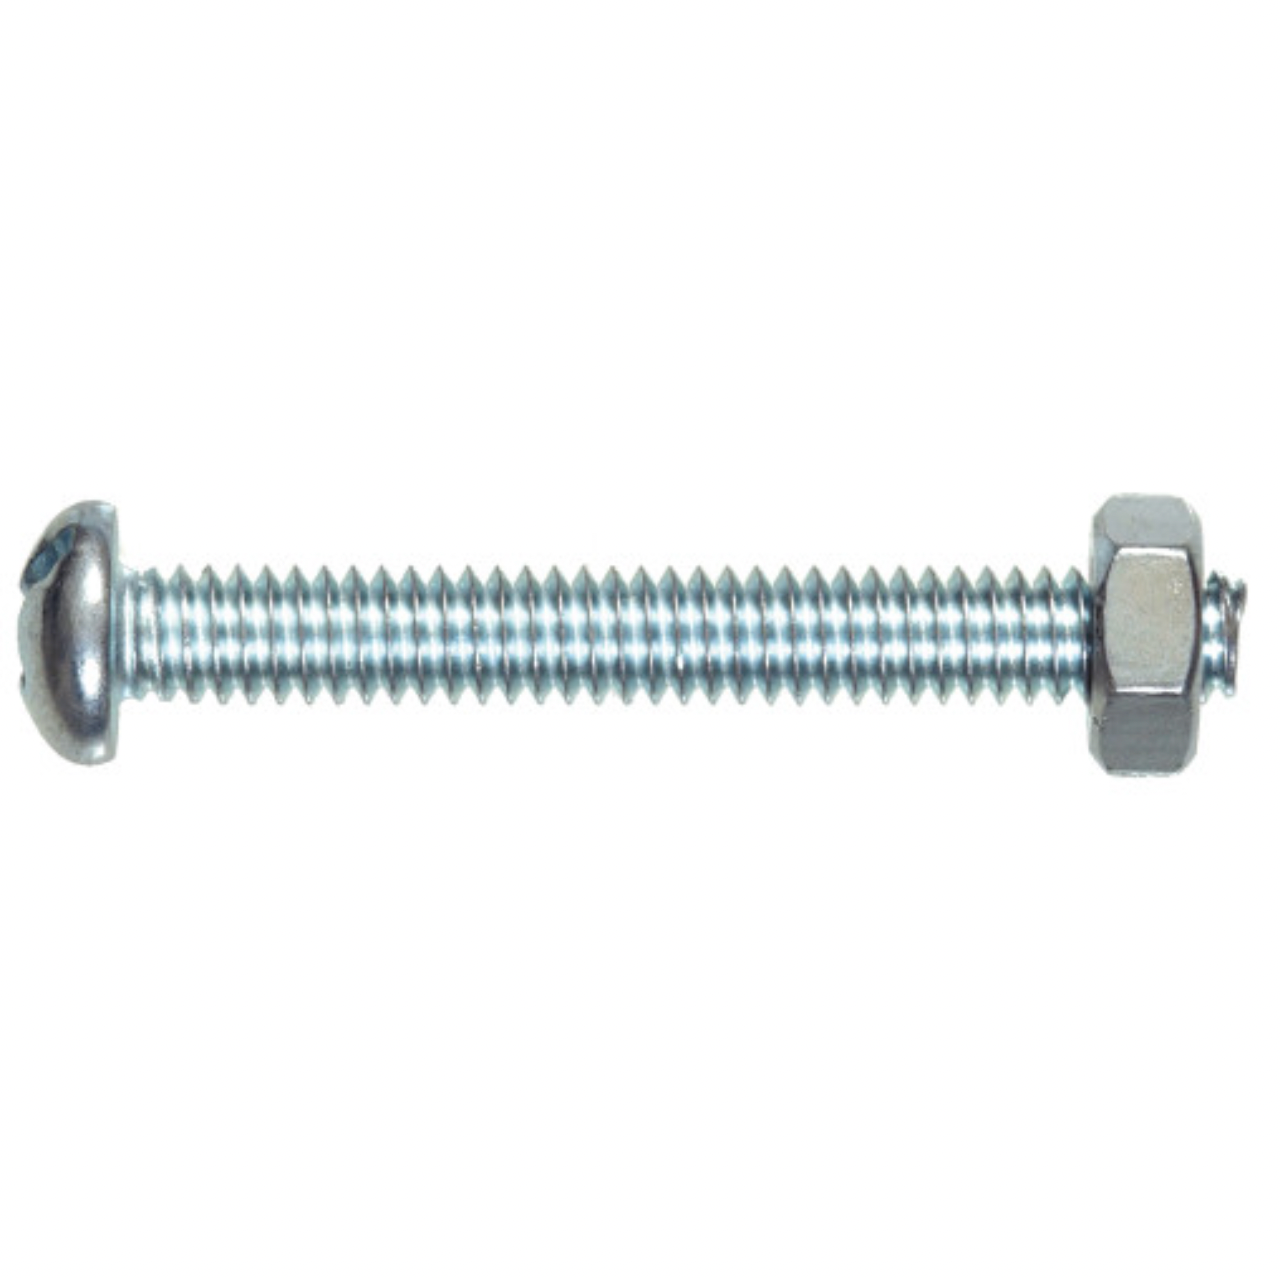 Round-Head Combo Stove Bolts With Nuts (1/4"-20 X 3") - 3 PC